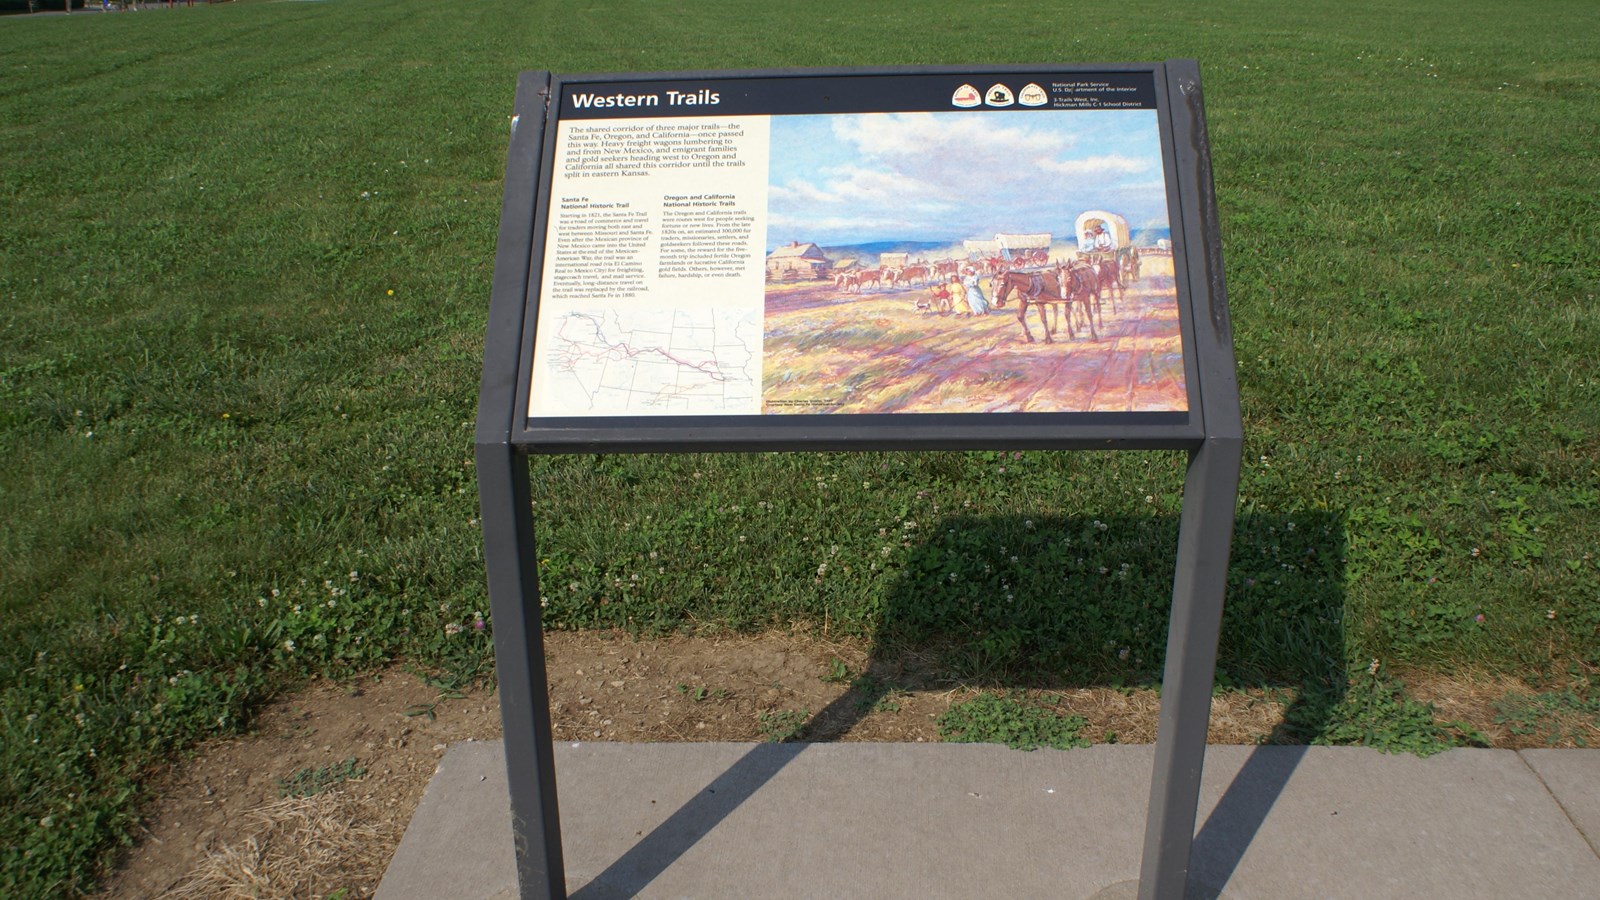 Interpretive panel featuring a colorful painting of a wagon train in a grassy field